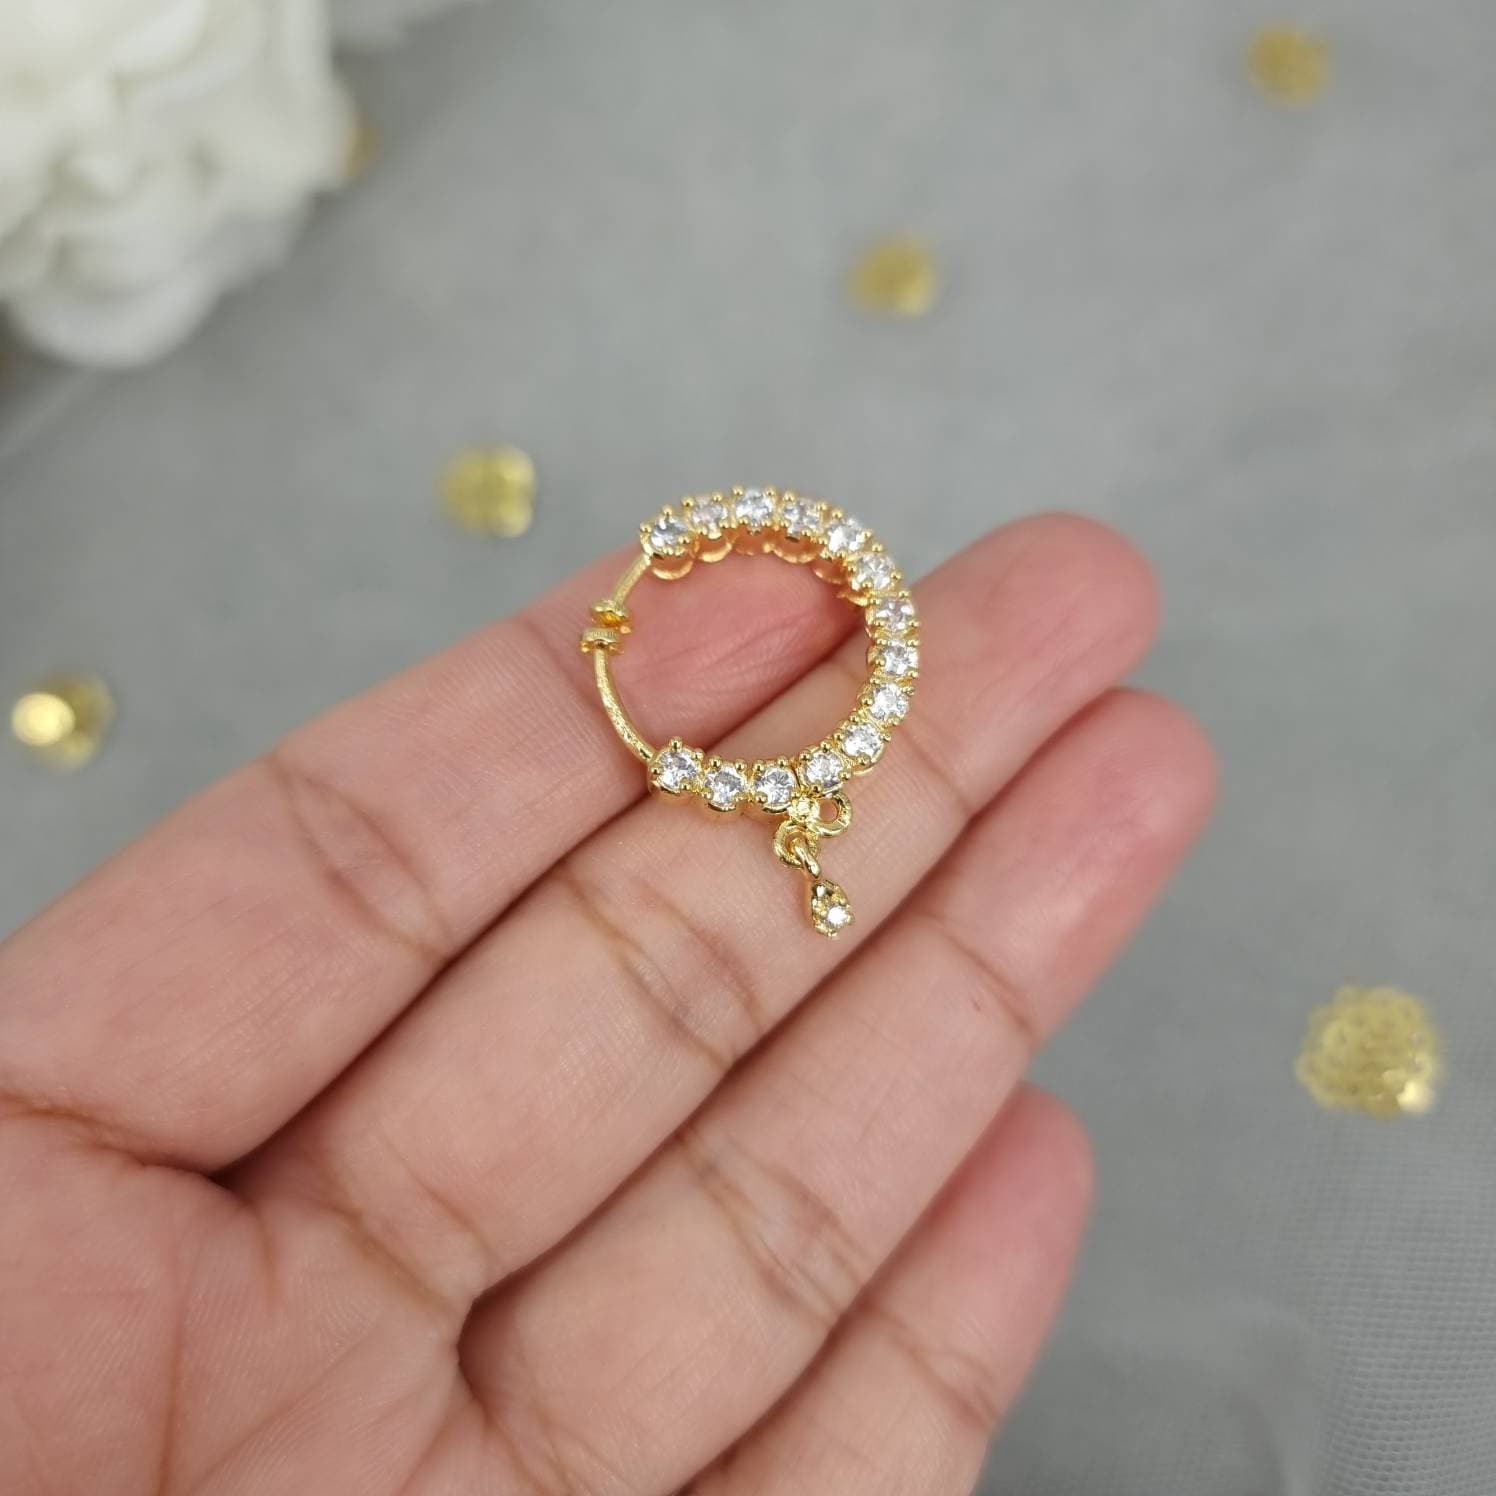 Buy Gold Rhinestone Non-piercing Nose Ring Online in India - Etsy